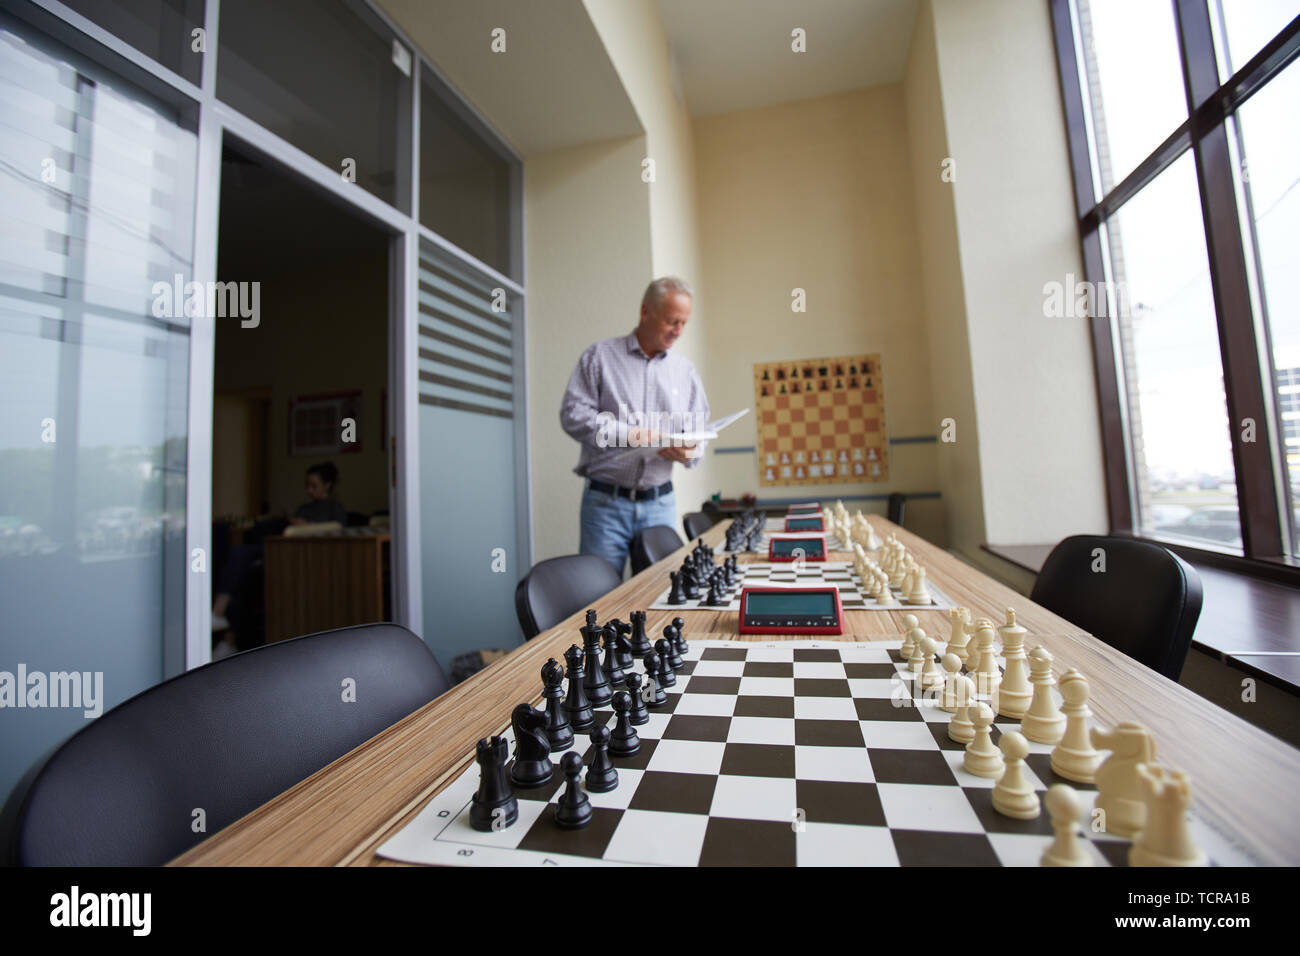 Aged male teacher in shirt checking how well prepared classroom is before next chess class Stock Photo